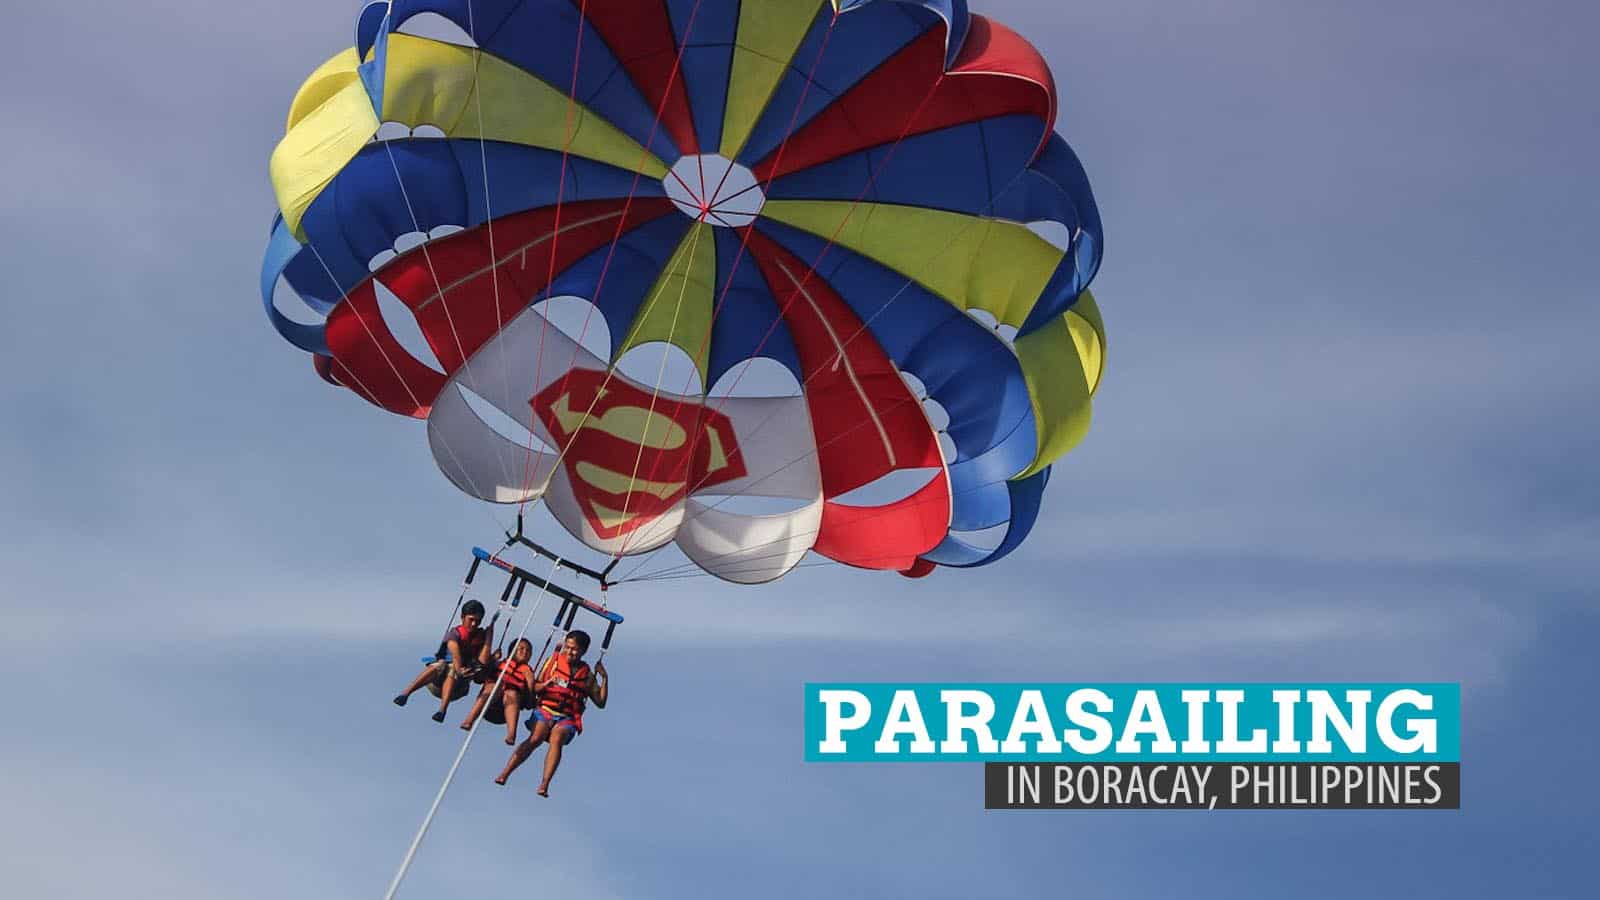 Parasailing in Boracay: 15 Minutes of Fear and Fancy